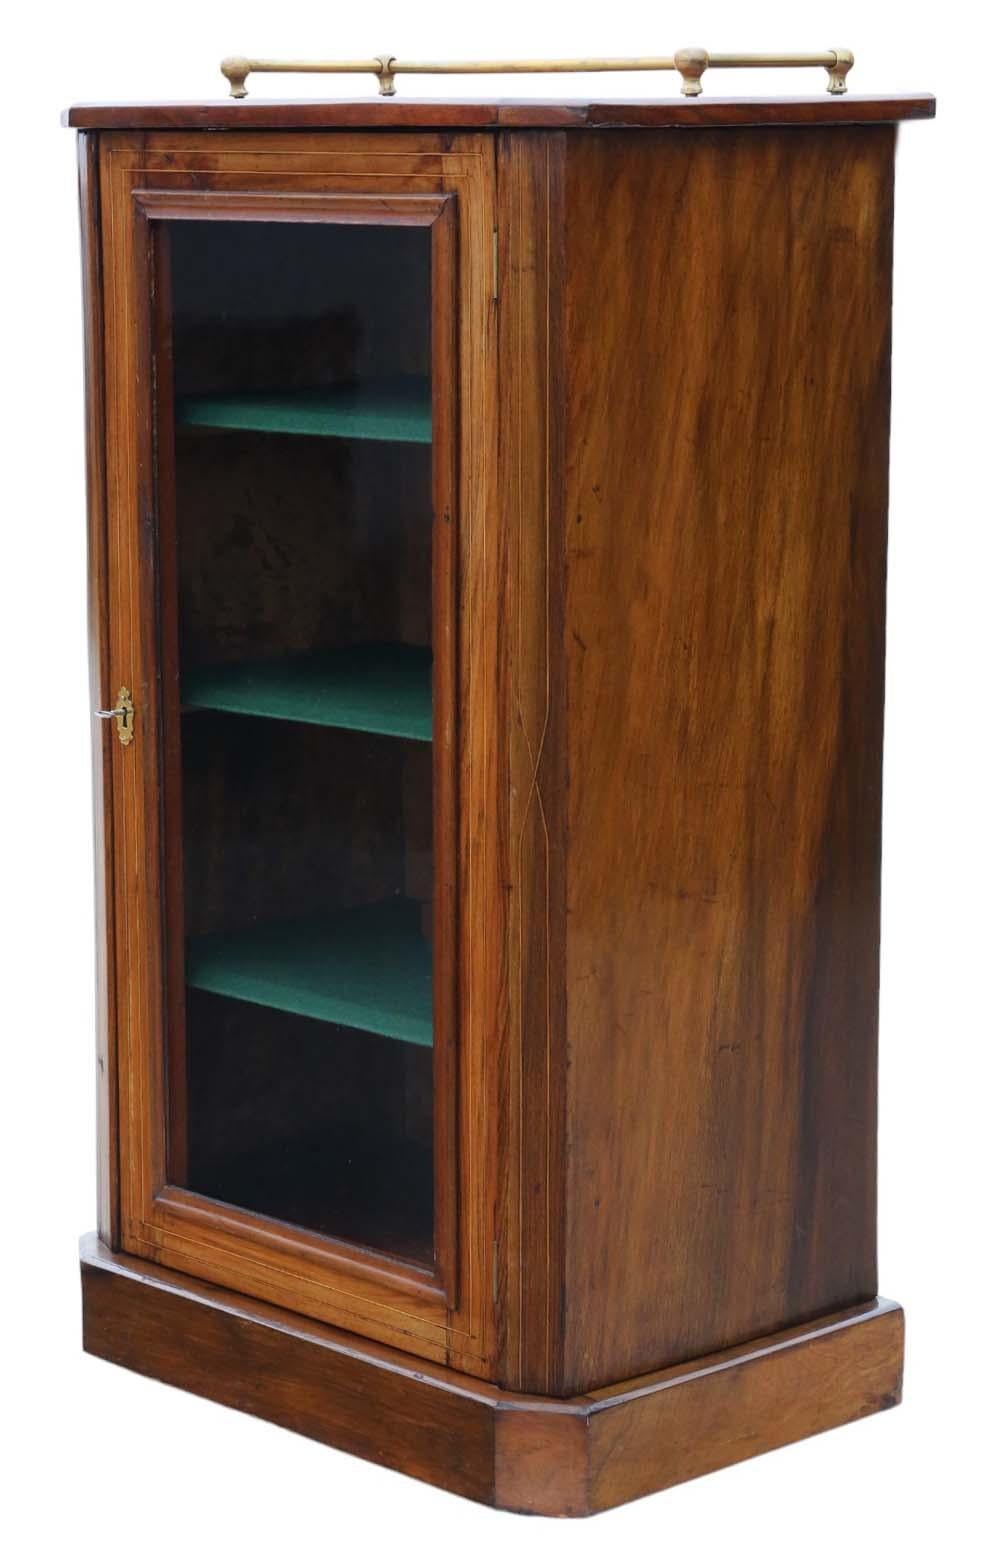 Antique circa 1880 quality inlaid walnut music pier display cabinet, boasting the finest coloration and patina.

This piece is solid and sturdy, with no loose joints, and it comes complete with a key. Its charming marquetry inlay adds to its